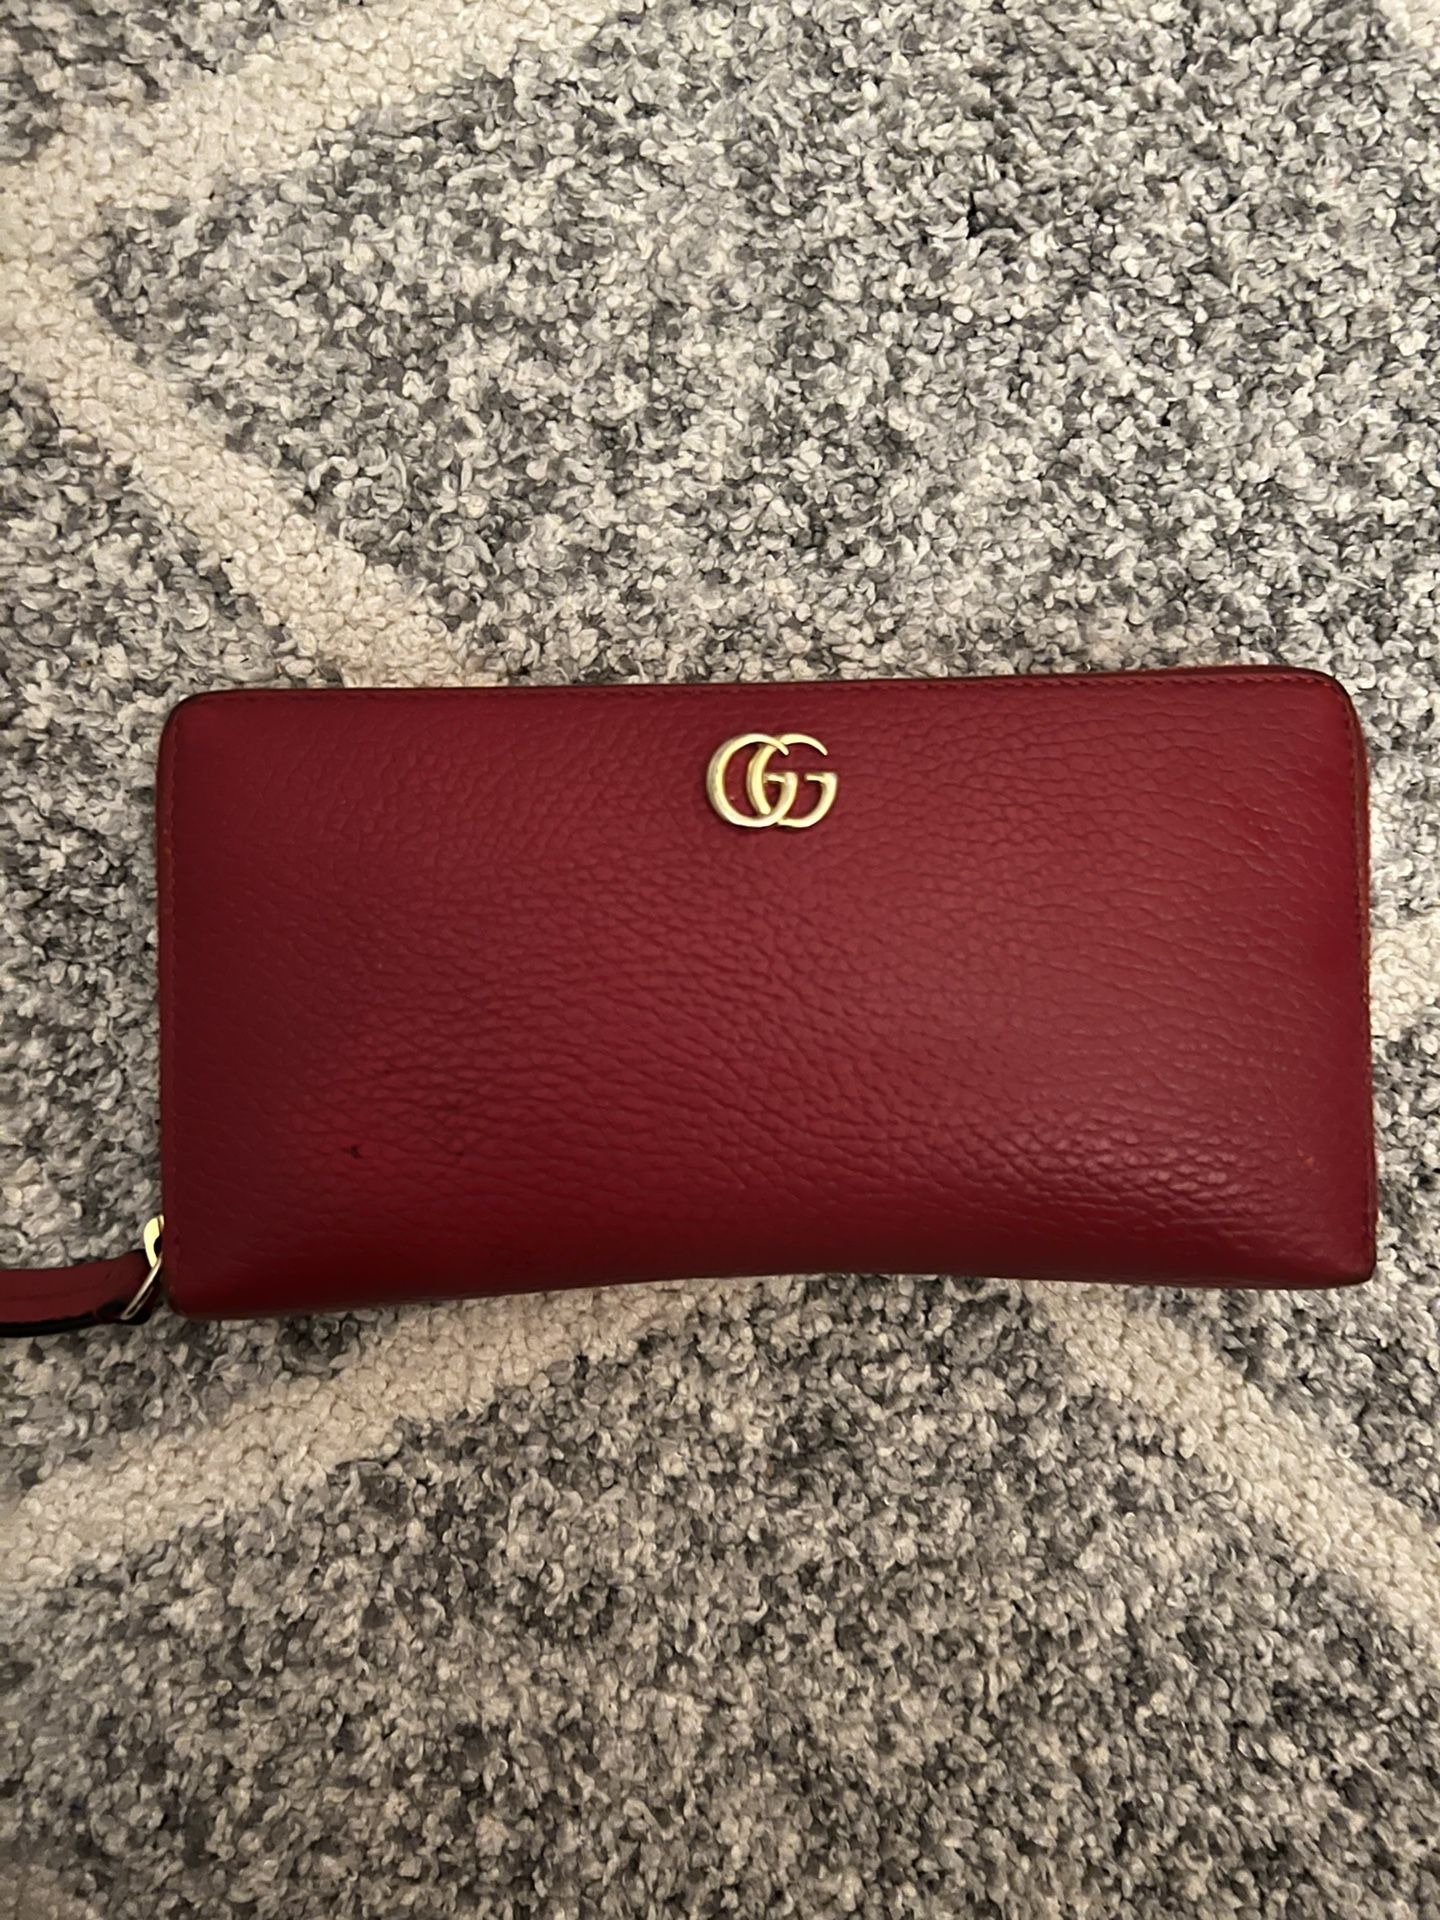 Gucci Leather Zipper Wallet